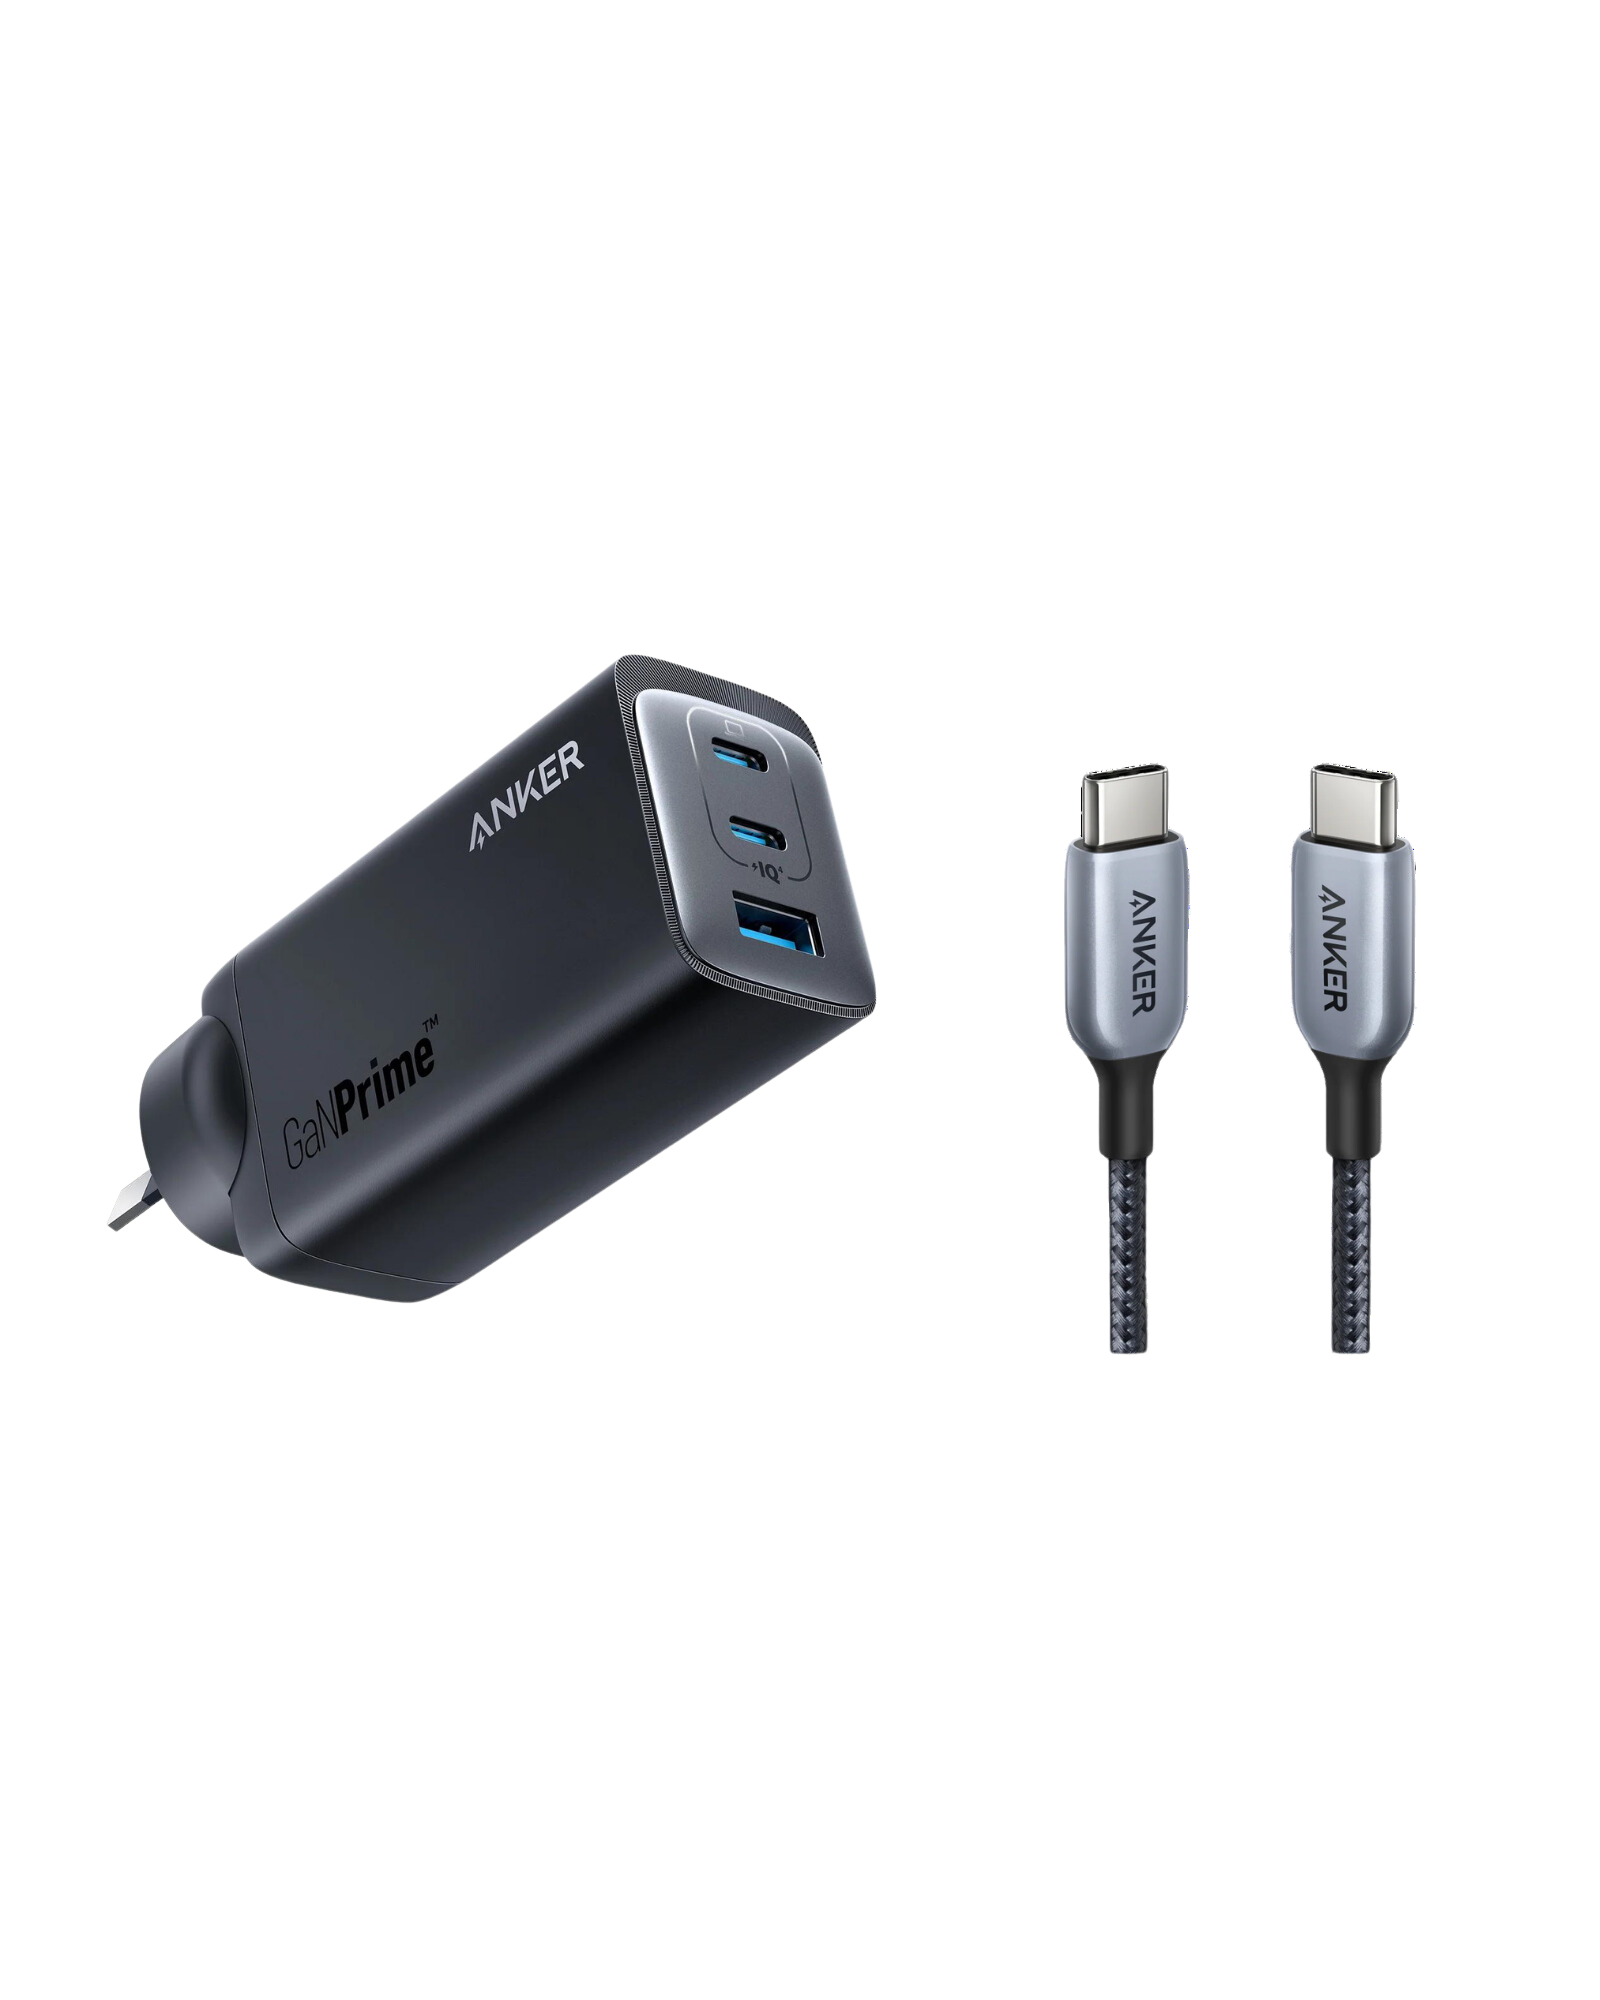 Anker 737 Charger (GaNPrime 120W) and Anker 765 USB-C to USB-C Cable (6ft,140W)